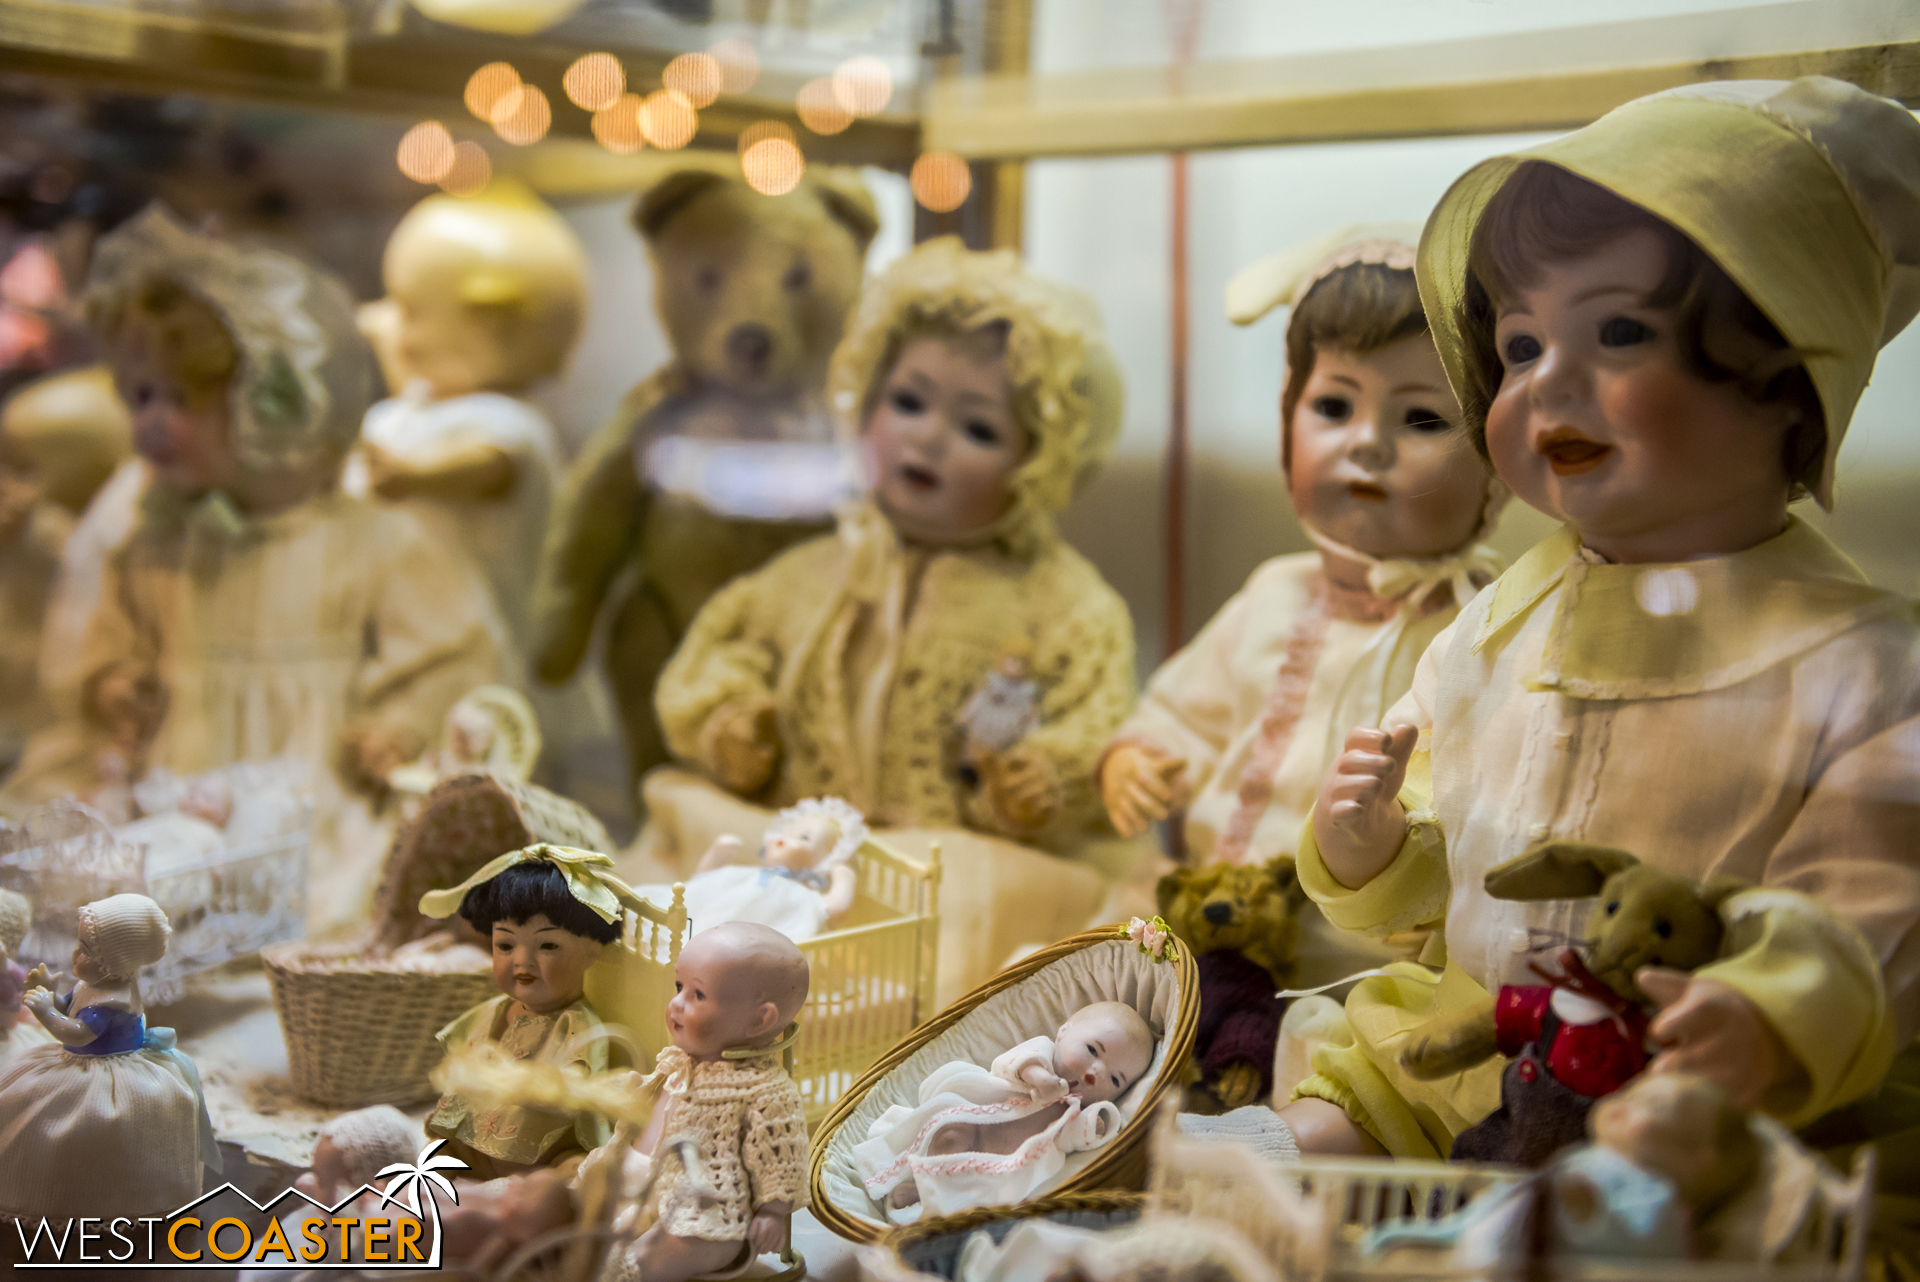  Each of these dolls contains the soul of a naughty child.&nbsp; Or as the kids call it these days... a "horcrux." (Disclaimer: the above statement may be completely invalid.) 